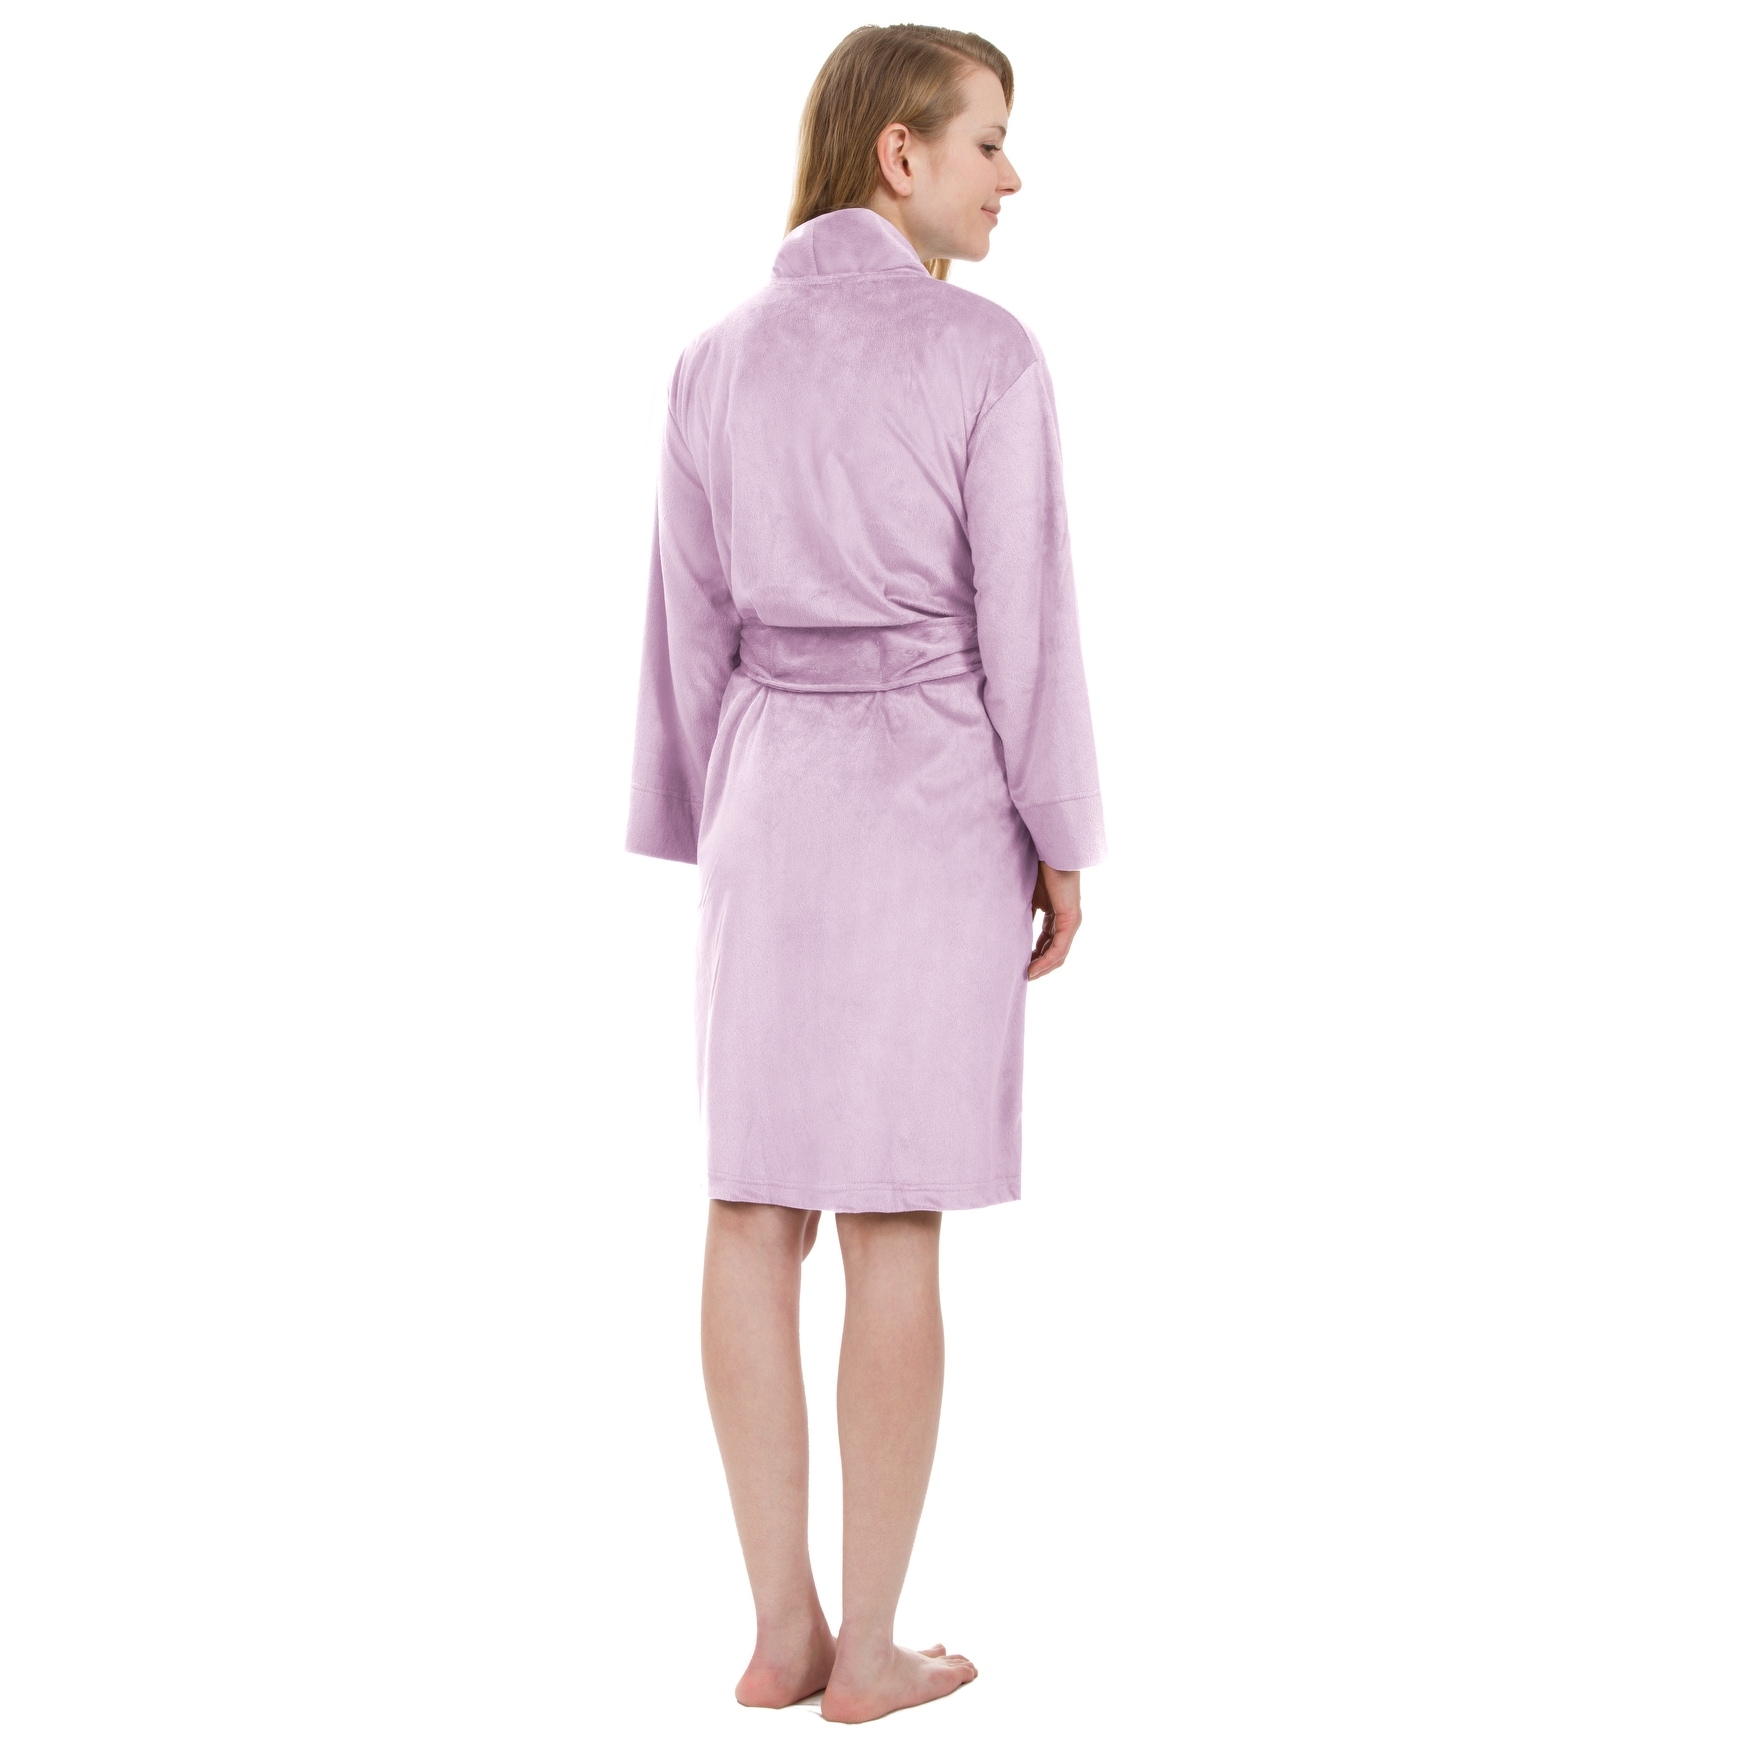 https://ak1.ostkcdn.com/images/products/is/images/direct/d120cf7e5fbded3fb51aad332bf9d54467c9b241/Leisureland-Women%27s-Ultra-Soft-Velvet-Fleece-Robe-with-Inseam-Pockets.jpg